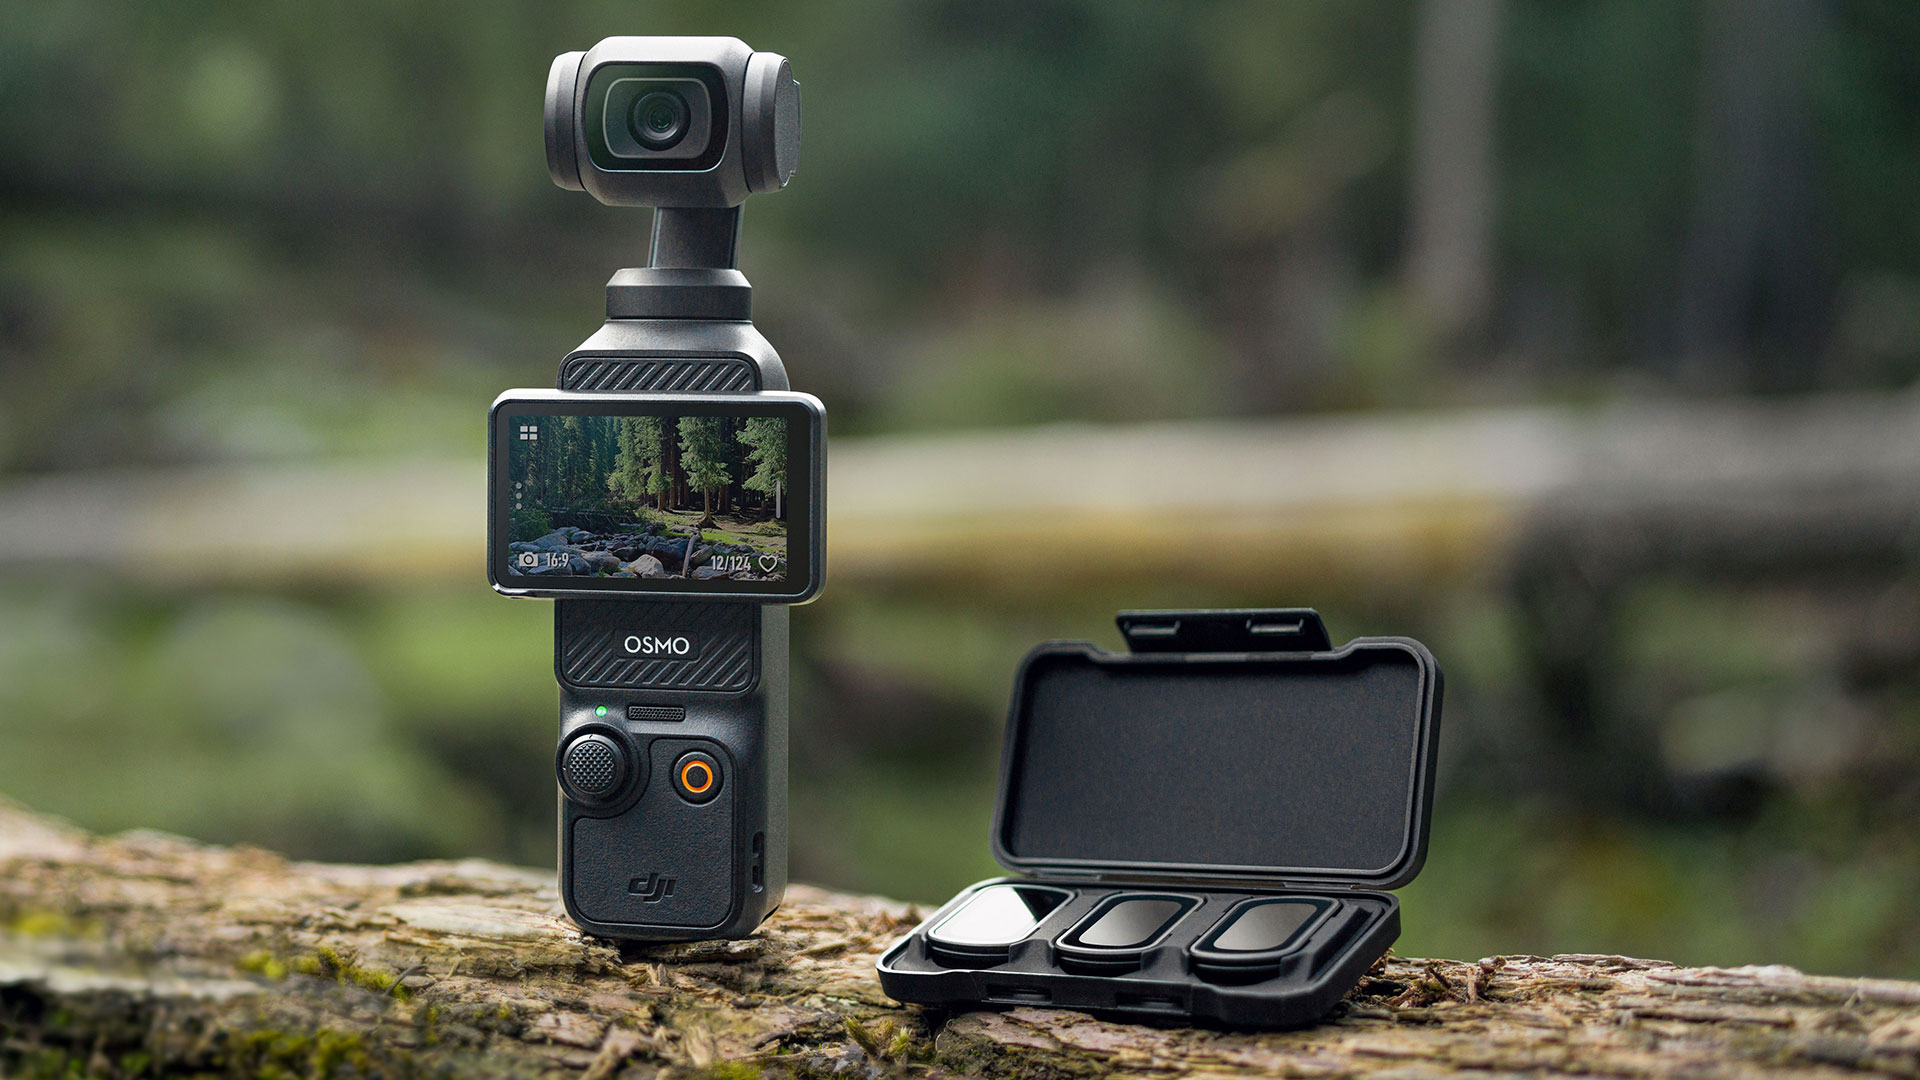 DJI's Osmo Pocket 3 features a 1-inch sensor and rotating display